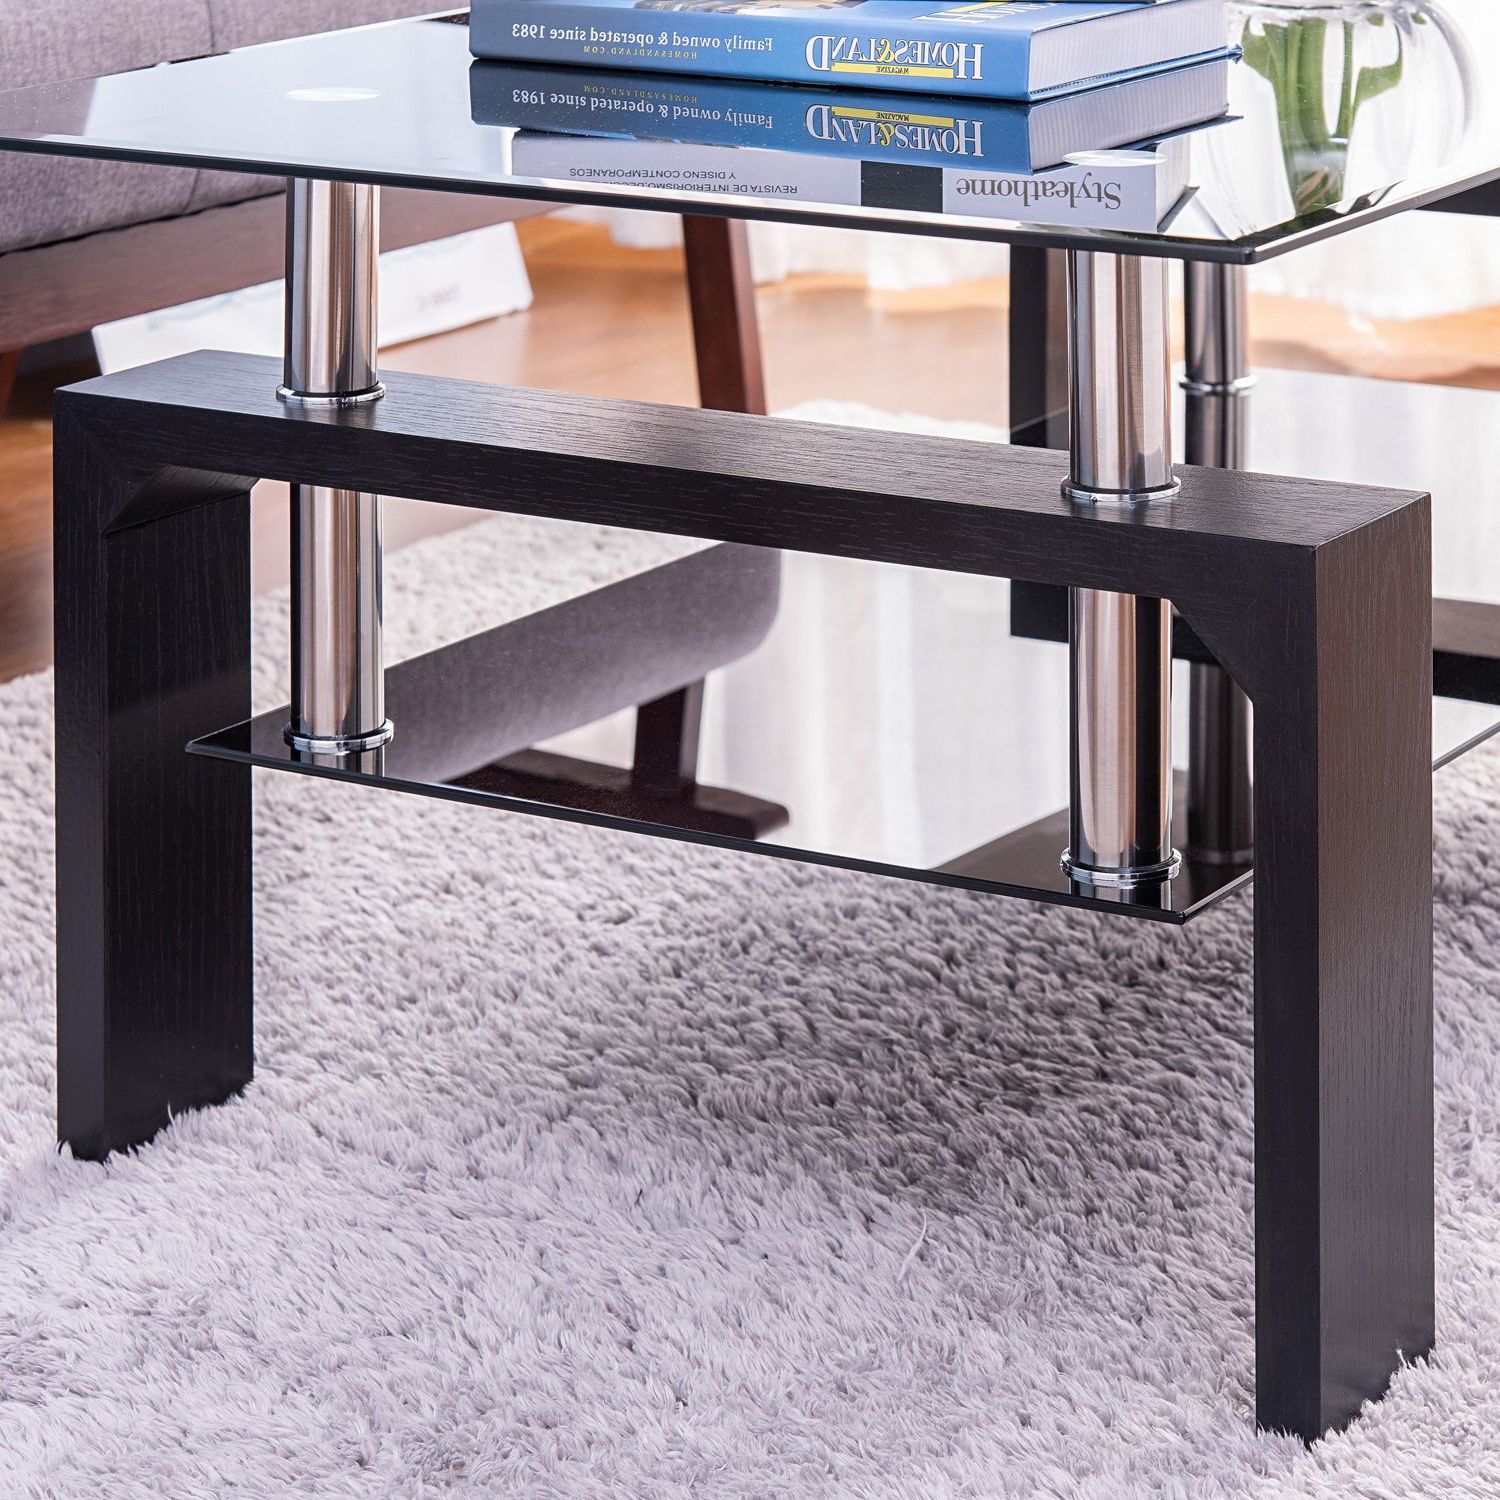 2019 Clear Glass Top Cocktail Tables Within Lowestbest Glass Top Dining Table, Glass End Table, Coffee (View 11 of 20)